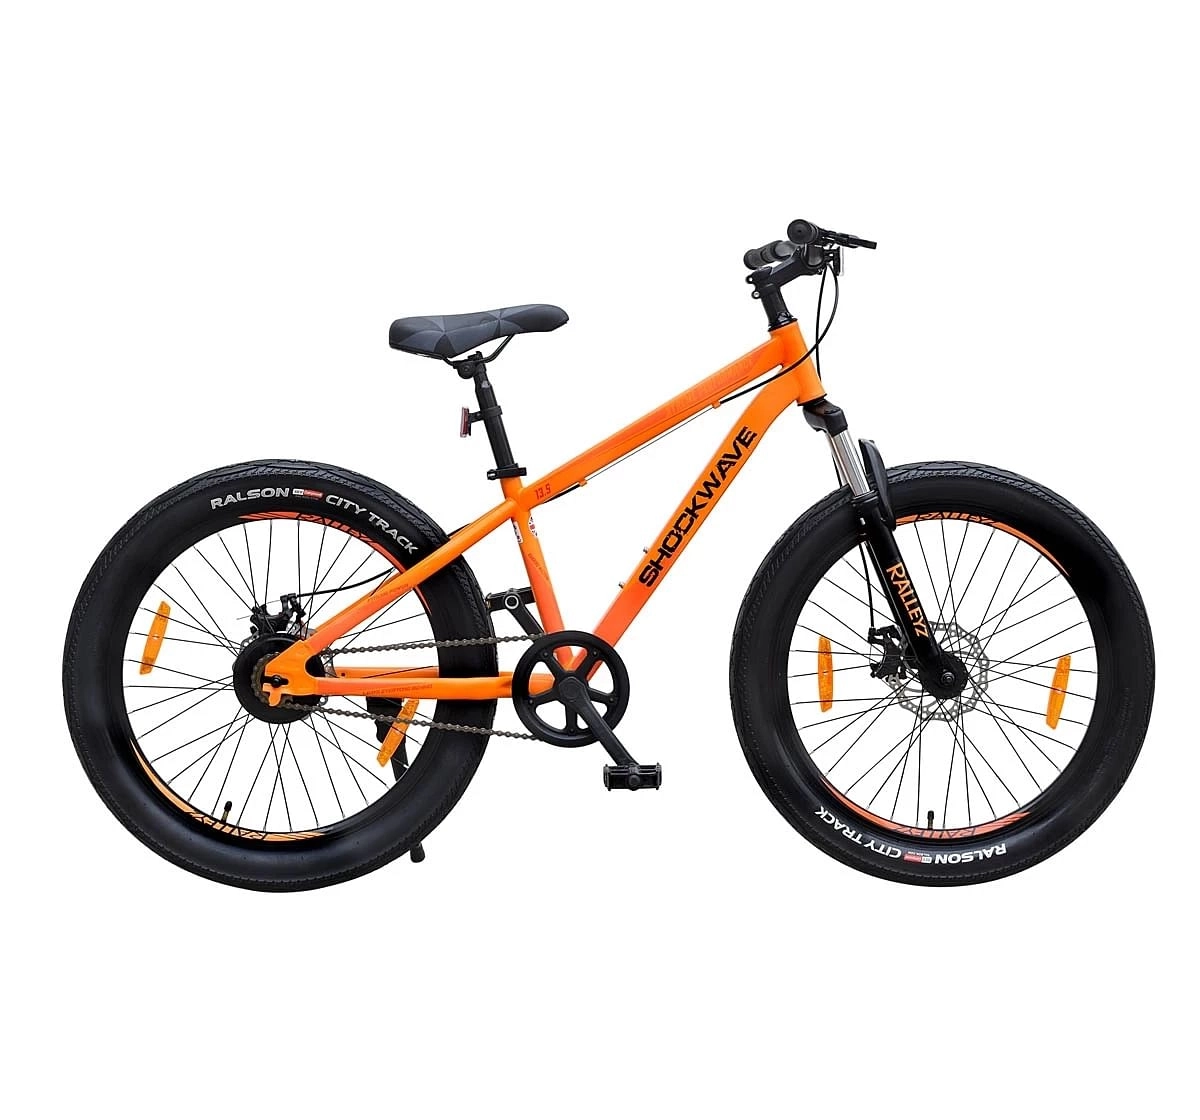 Ralleyz Astra Shockwave 24 Inch, Bicycles For Kids, Multicolour, 9Y+